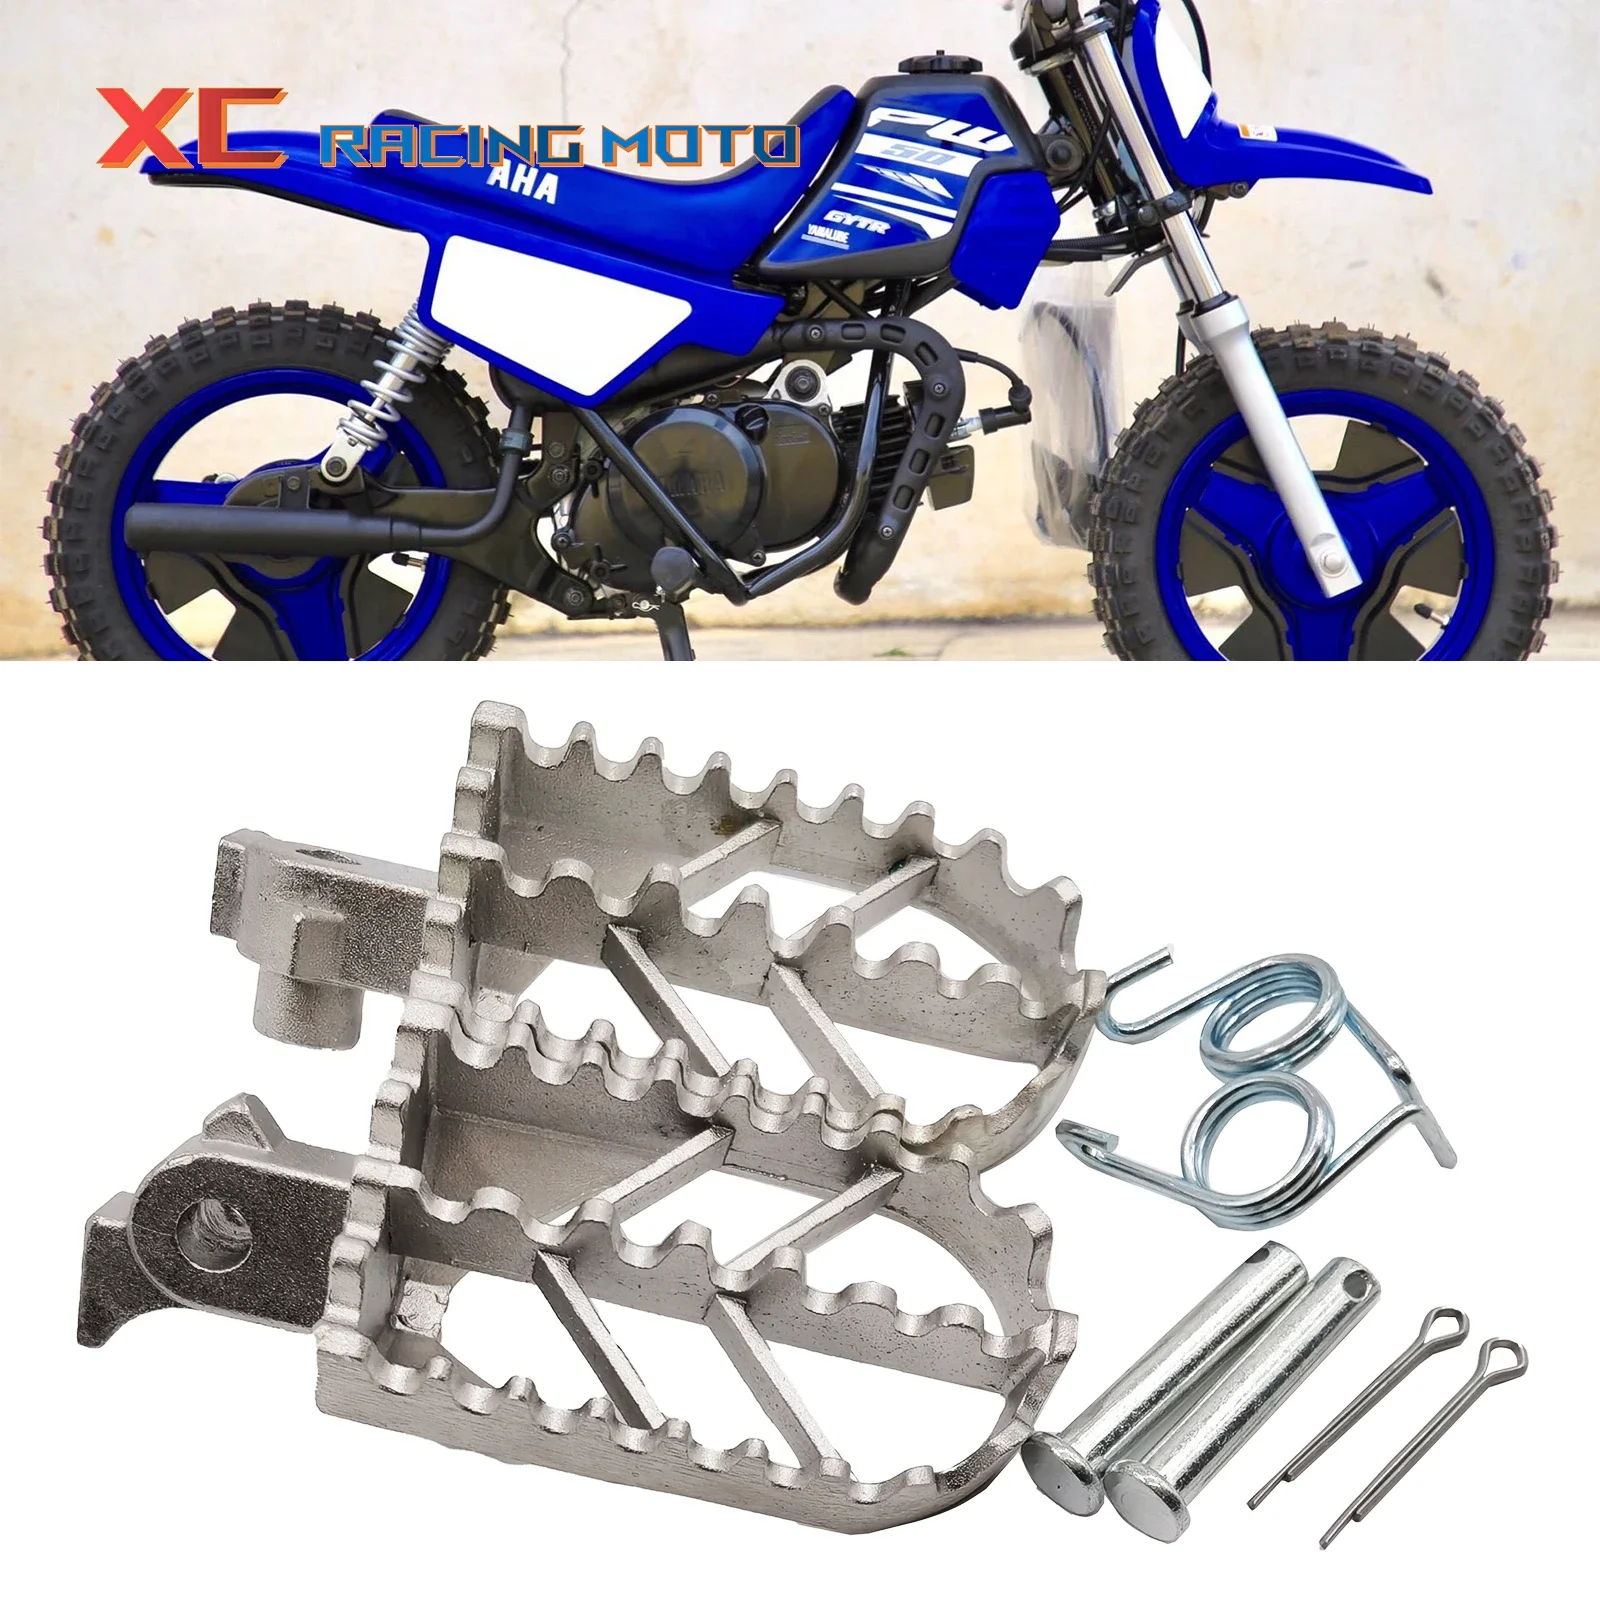 Stainless Steel Footpegs Foot Rest Pegs For Yamaha TW200 PW50 PW80 Honda... - $30.58